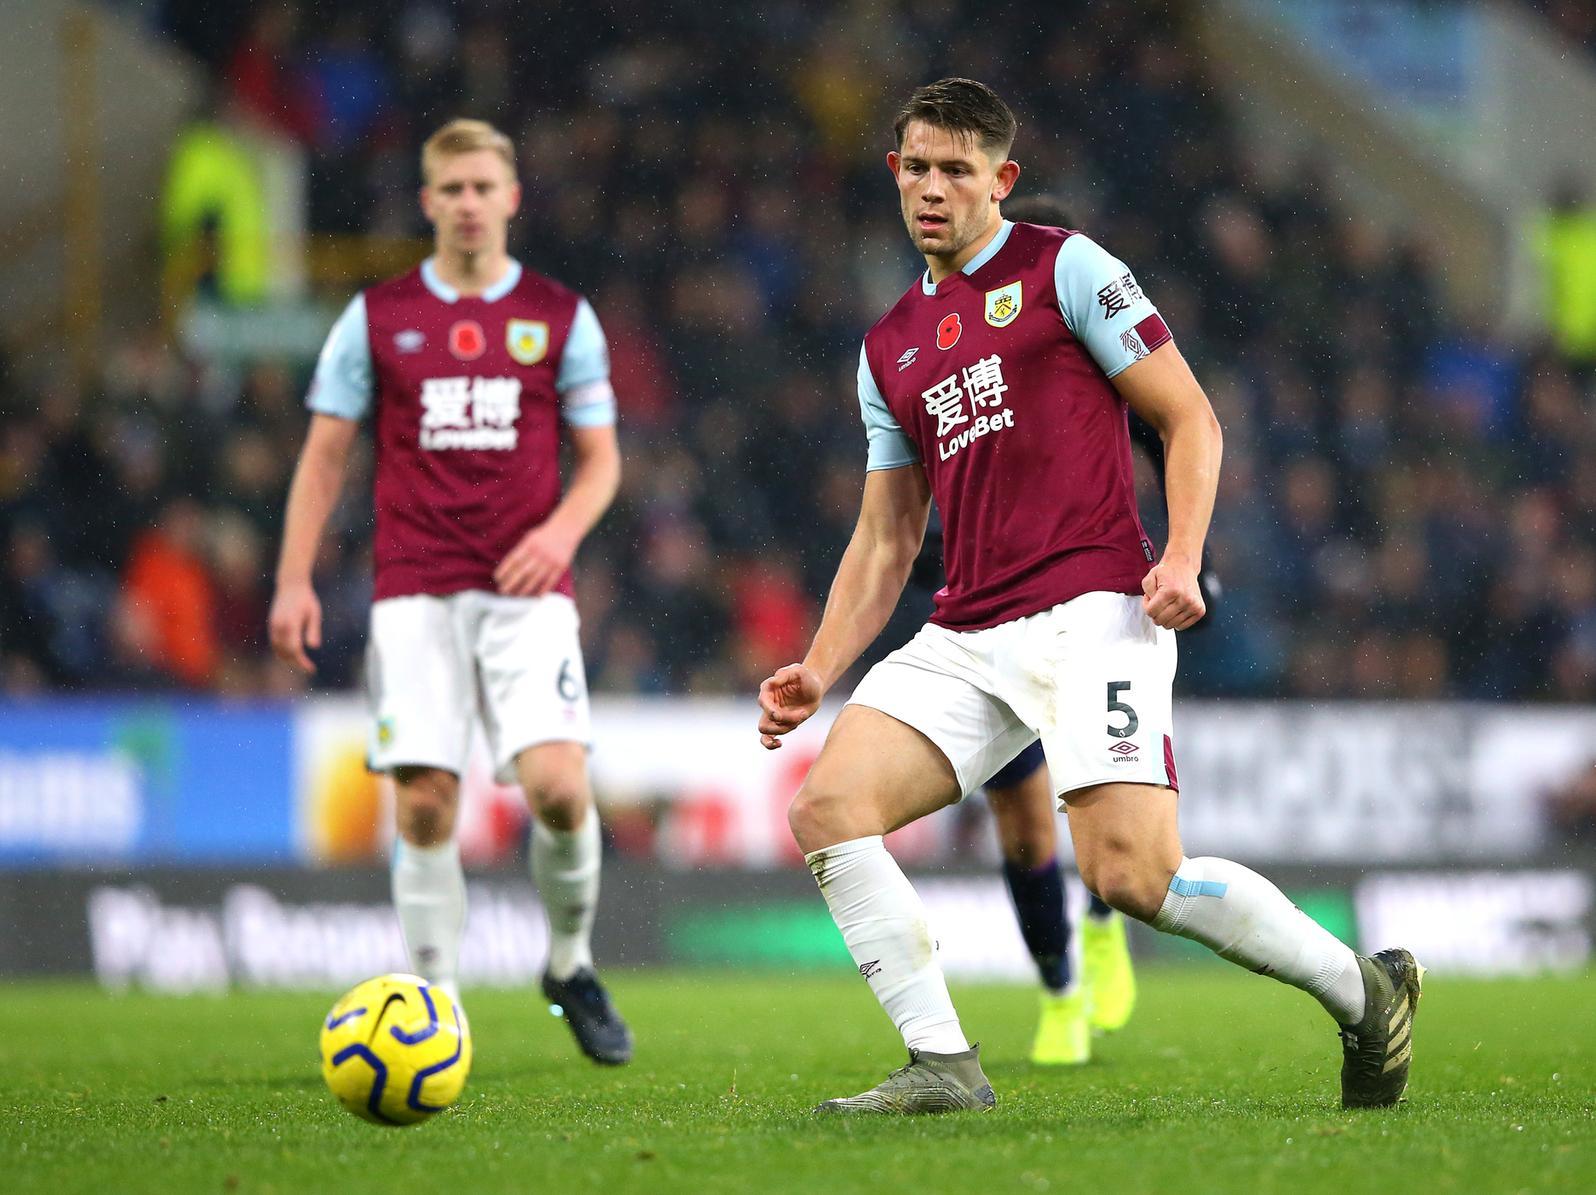 Another standout performance from the Burnley centre back. Showed a cool head in some pressurised situations at the back, won everything he competed for and made a key intervention to deny King early in the first half.